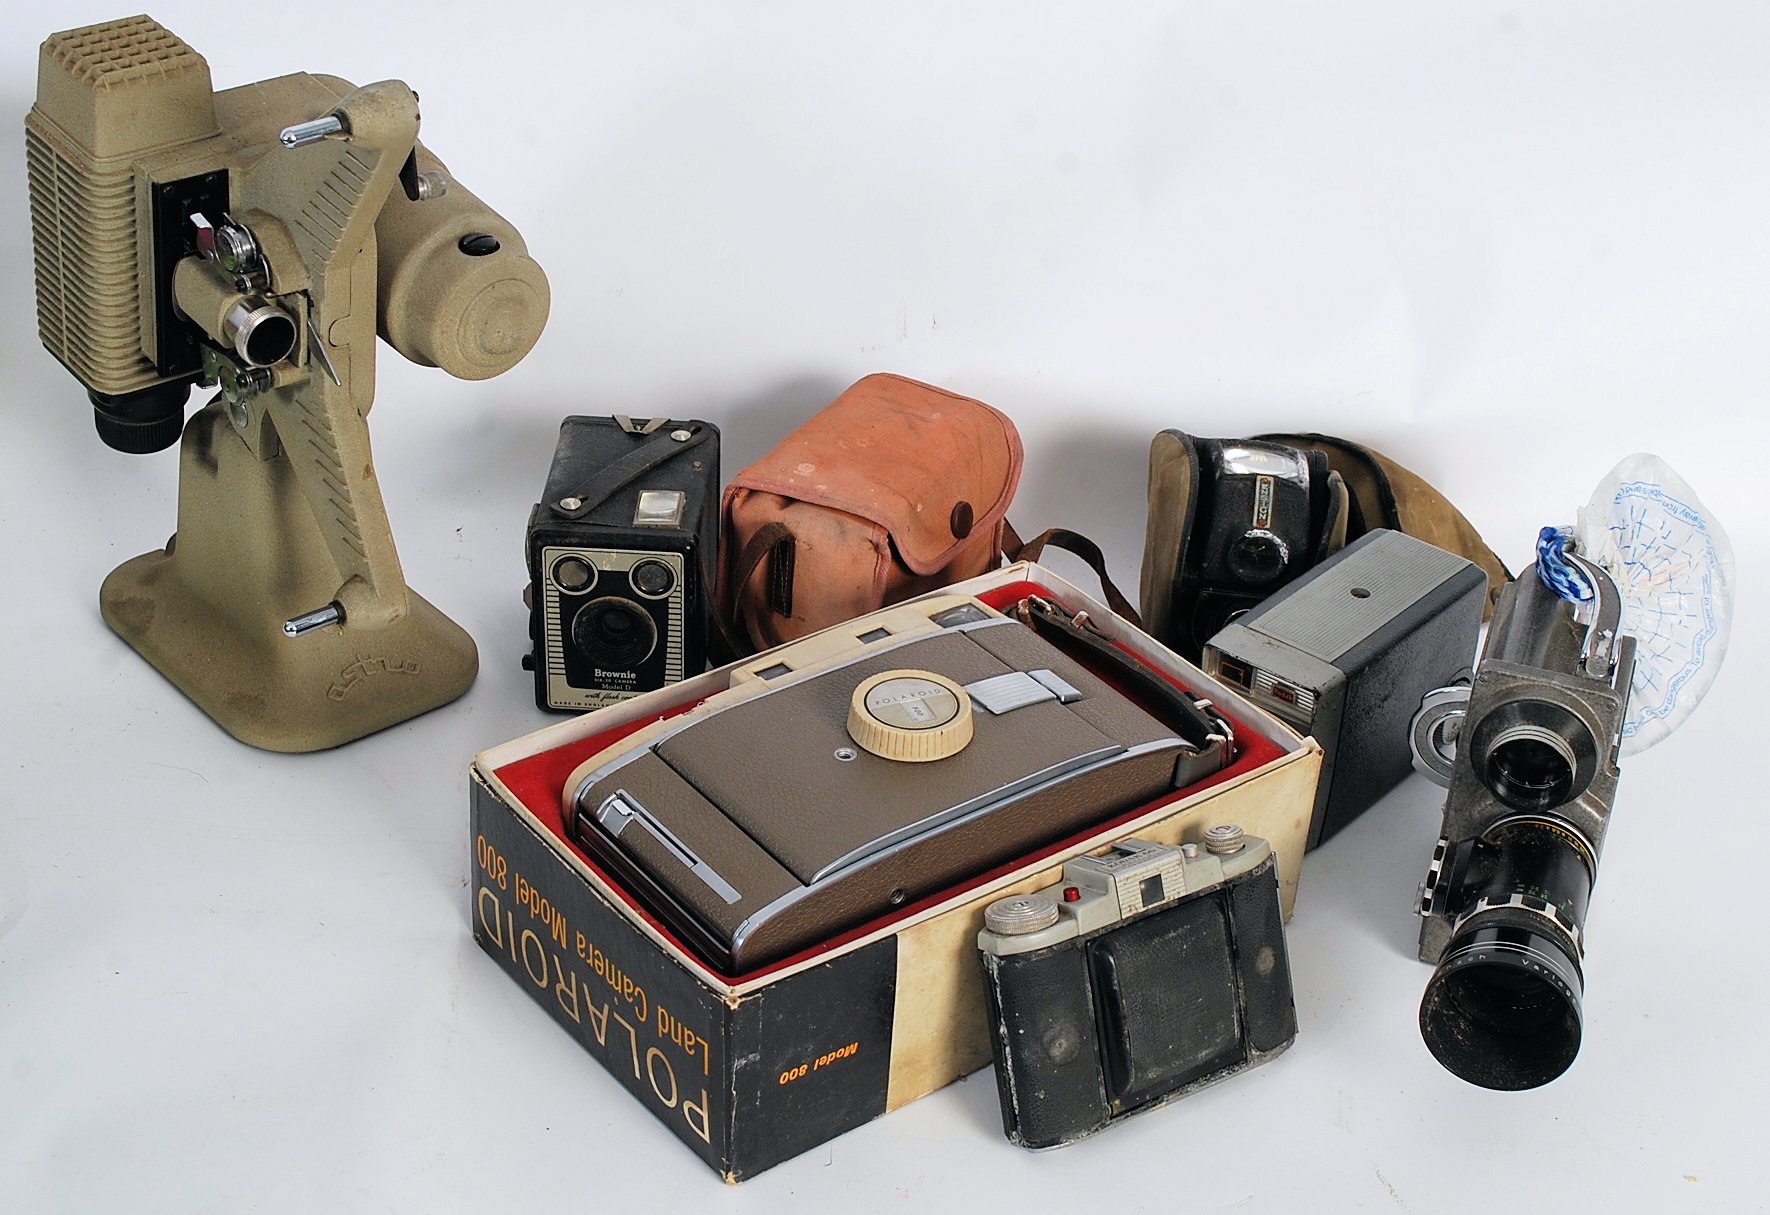 A collection of vintage cameras to include a boxed Kodak poloroid 800, Kodal 66 model, cine